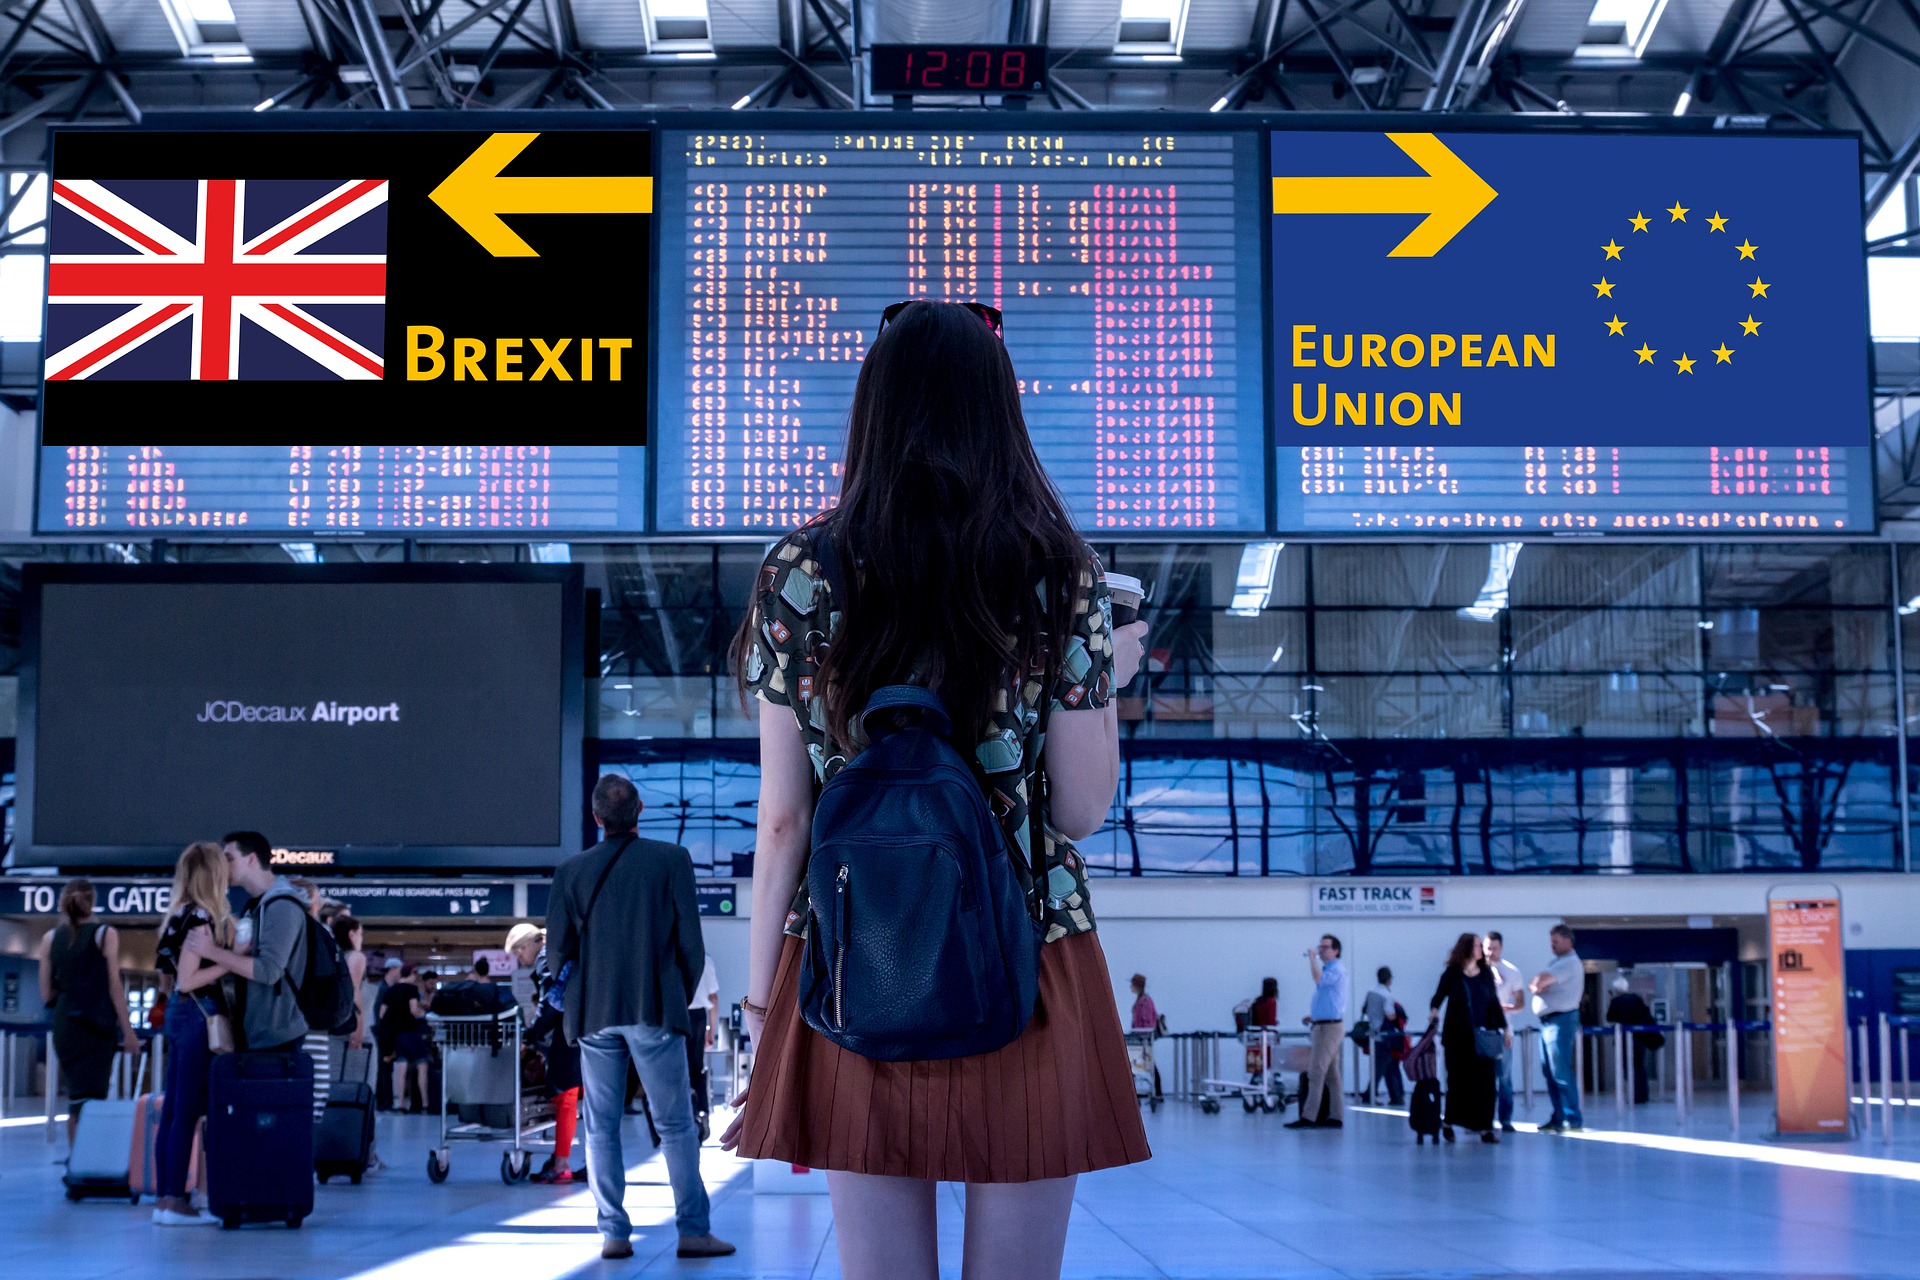 Girl in front of 2 banners indicating EU or Brexit?